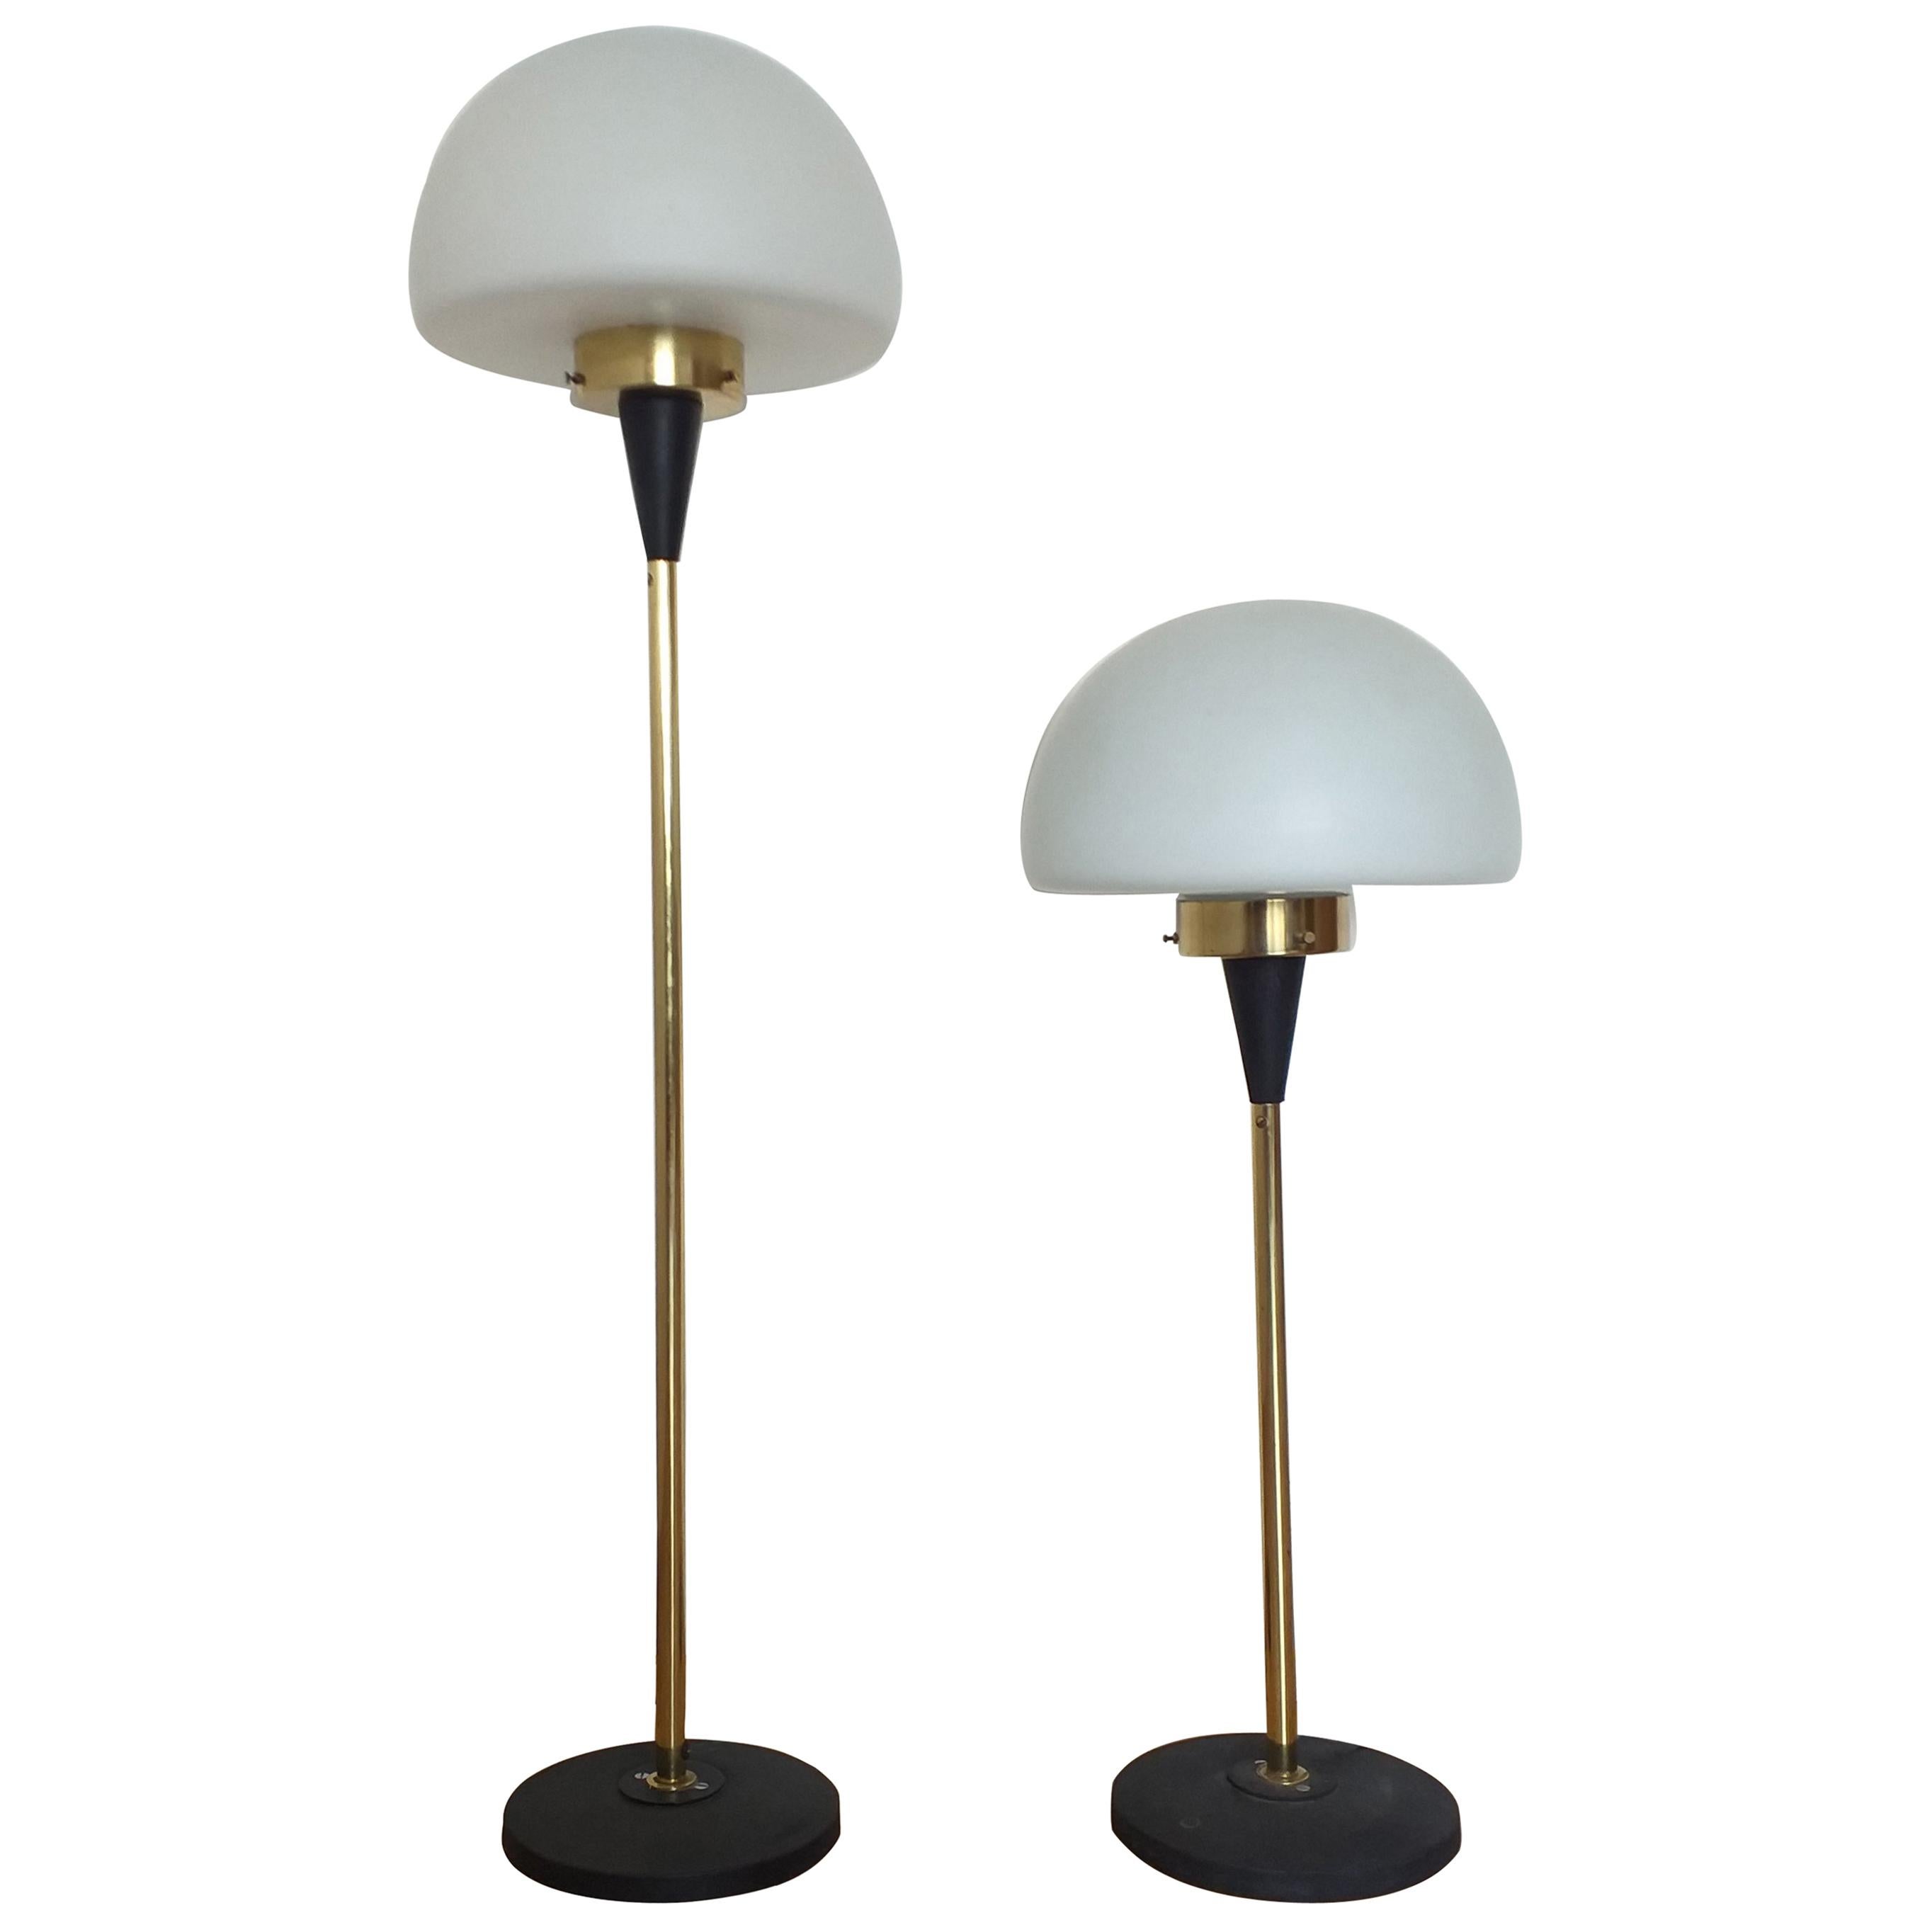 Set of Two Floor Lamps Lidokov Designed by Josef Hurka, 1970s